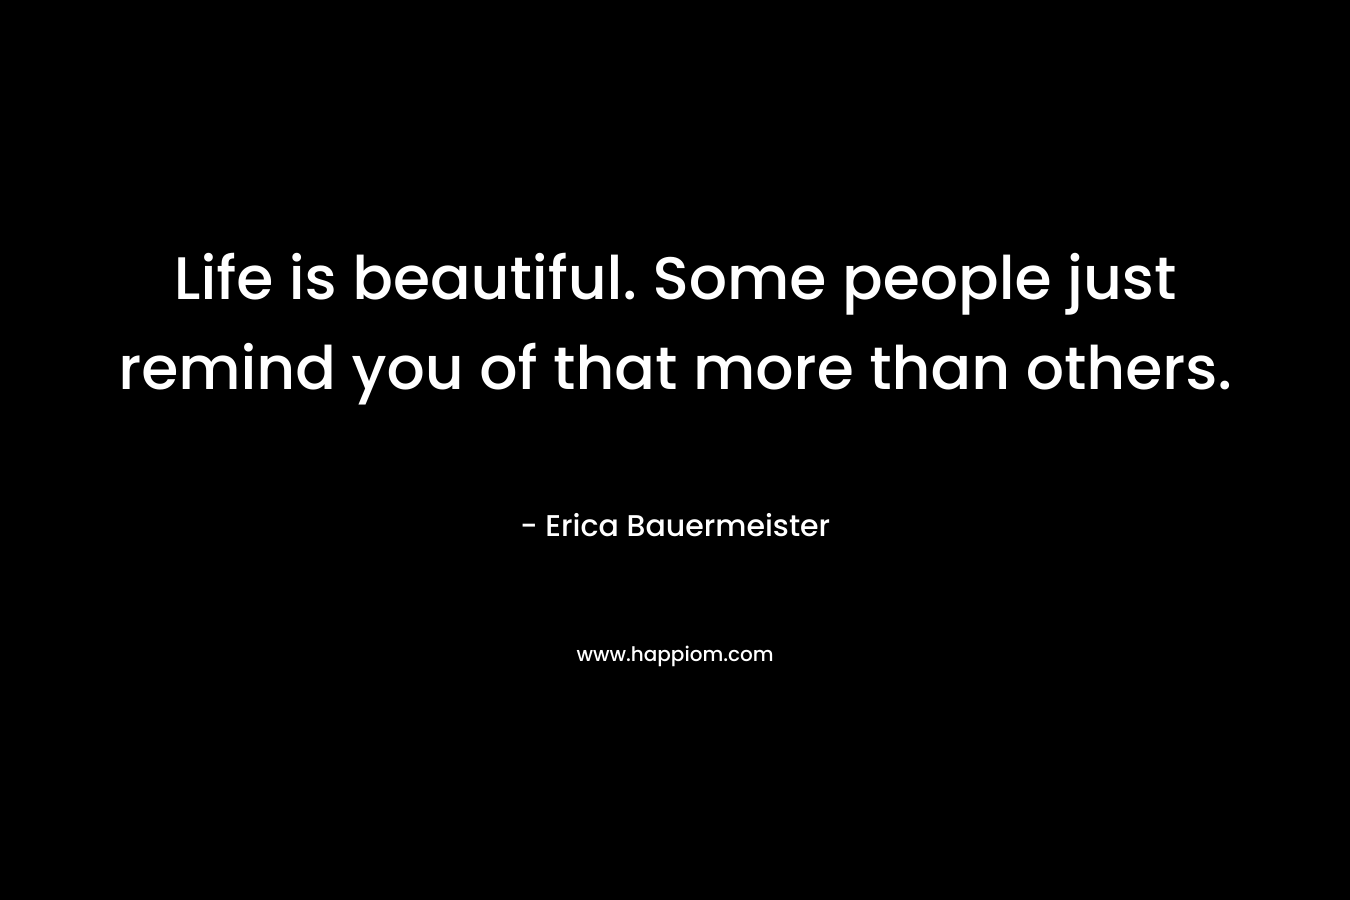 Life is beautiful. Some people just remind you of that more than others. – Erica Bauermeister